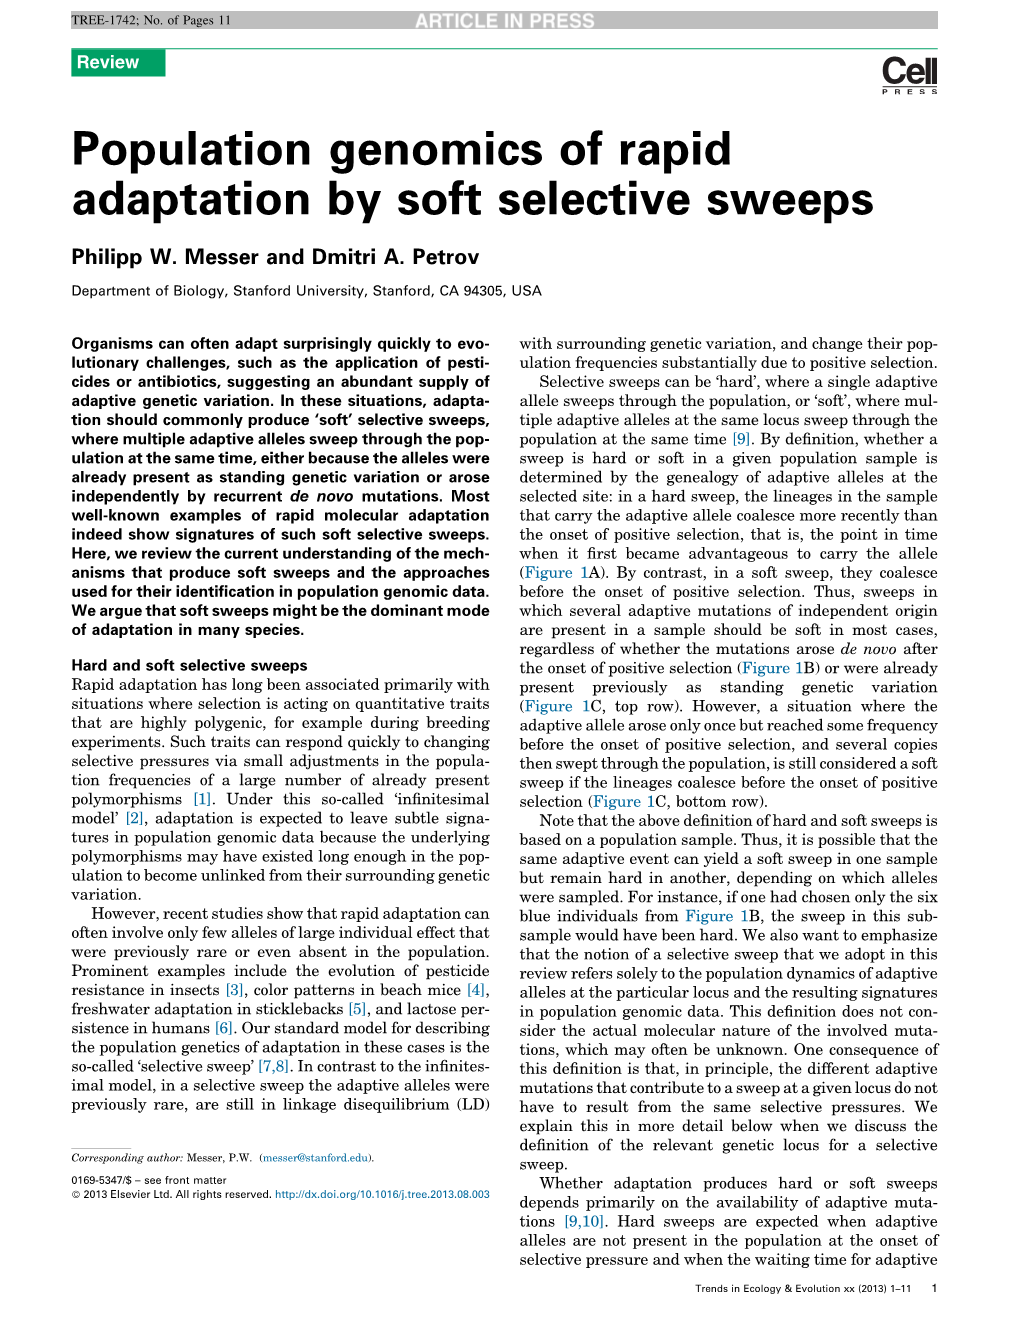 Population Genomics of Rapid Adaptation by Soft Selective Sweeps